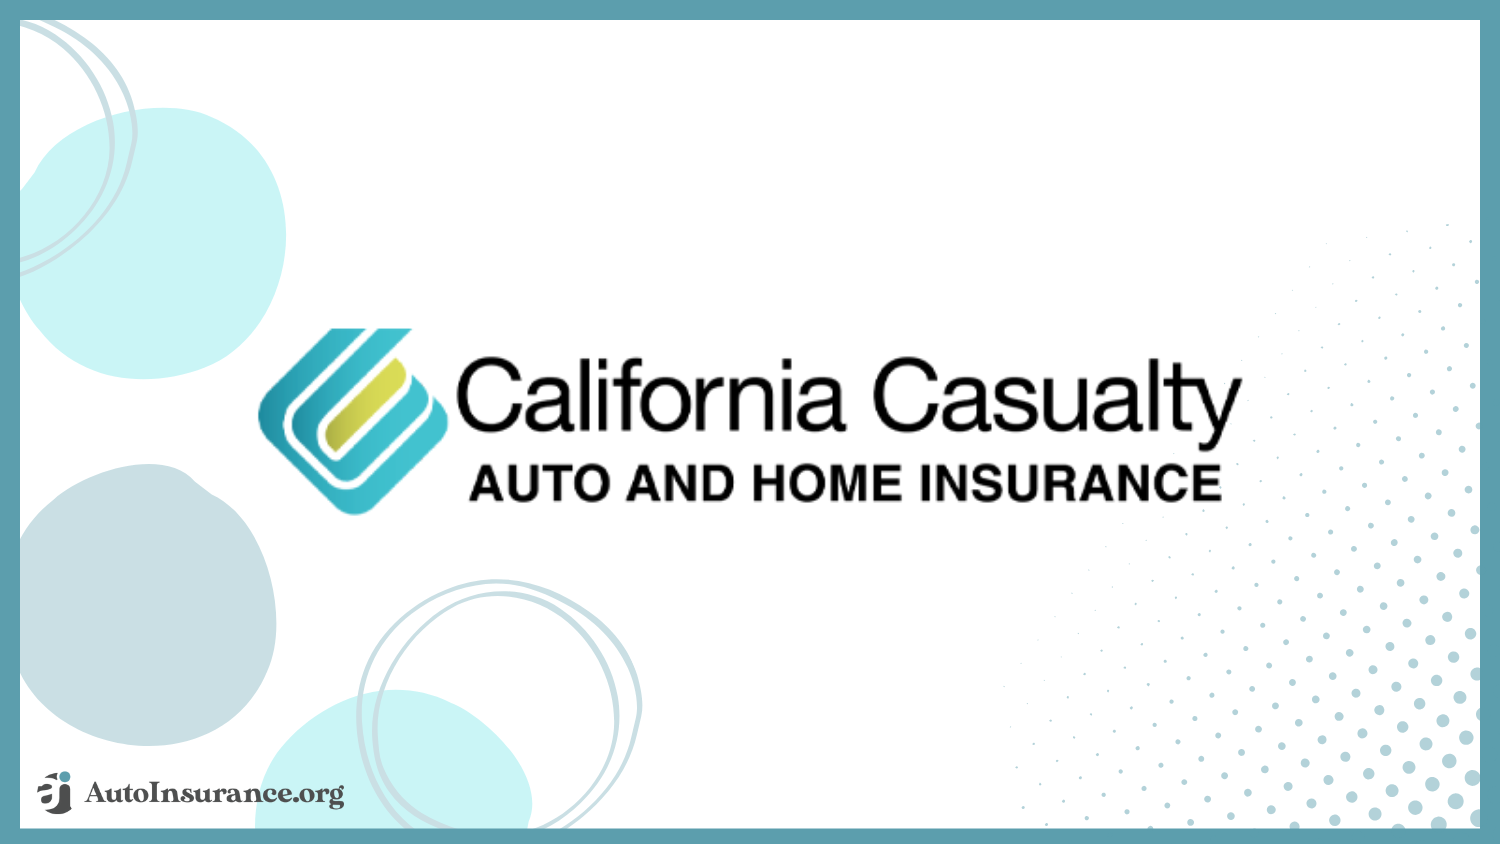 California Casualty Best Auto Insurance for Firefighters